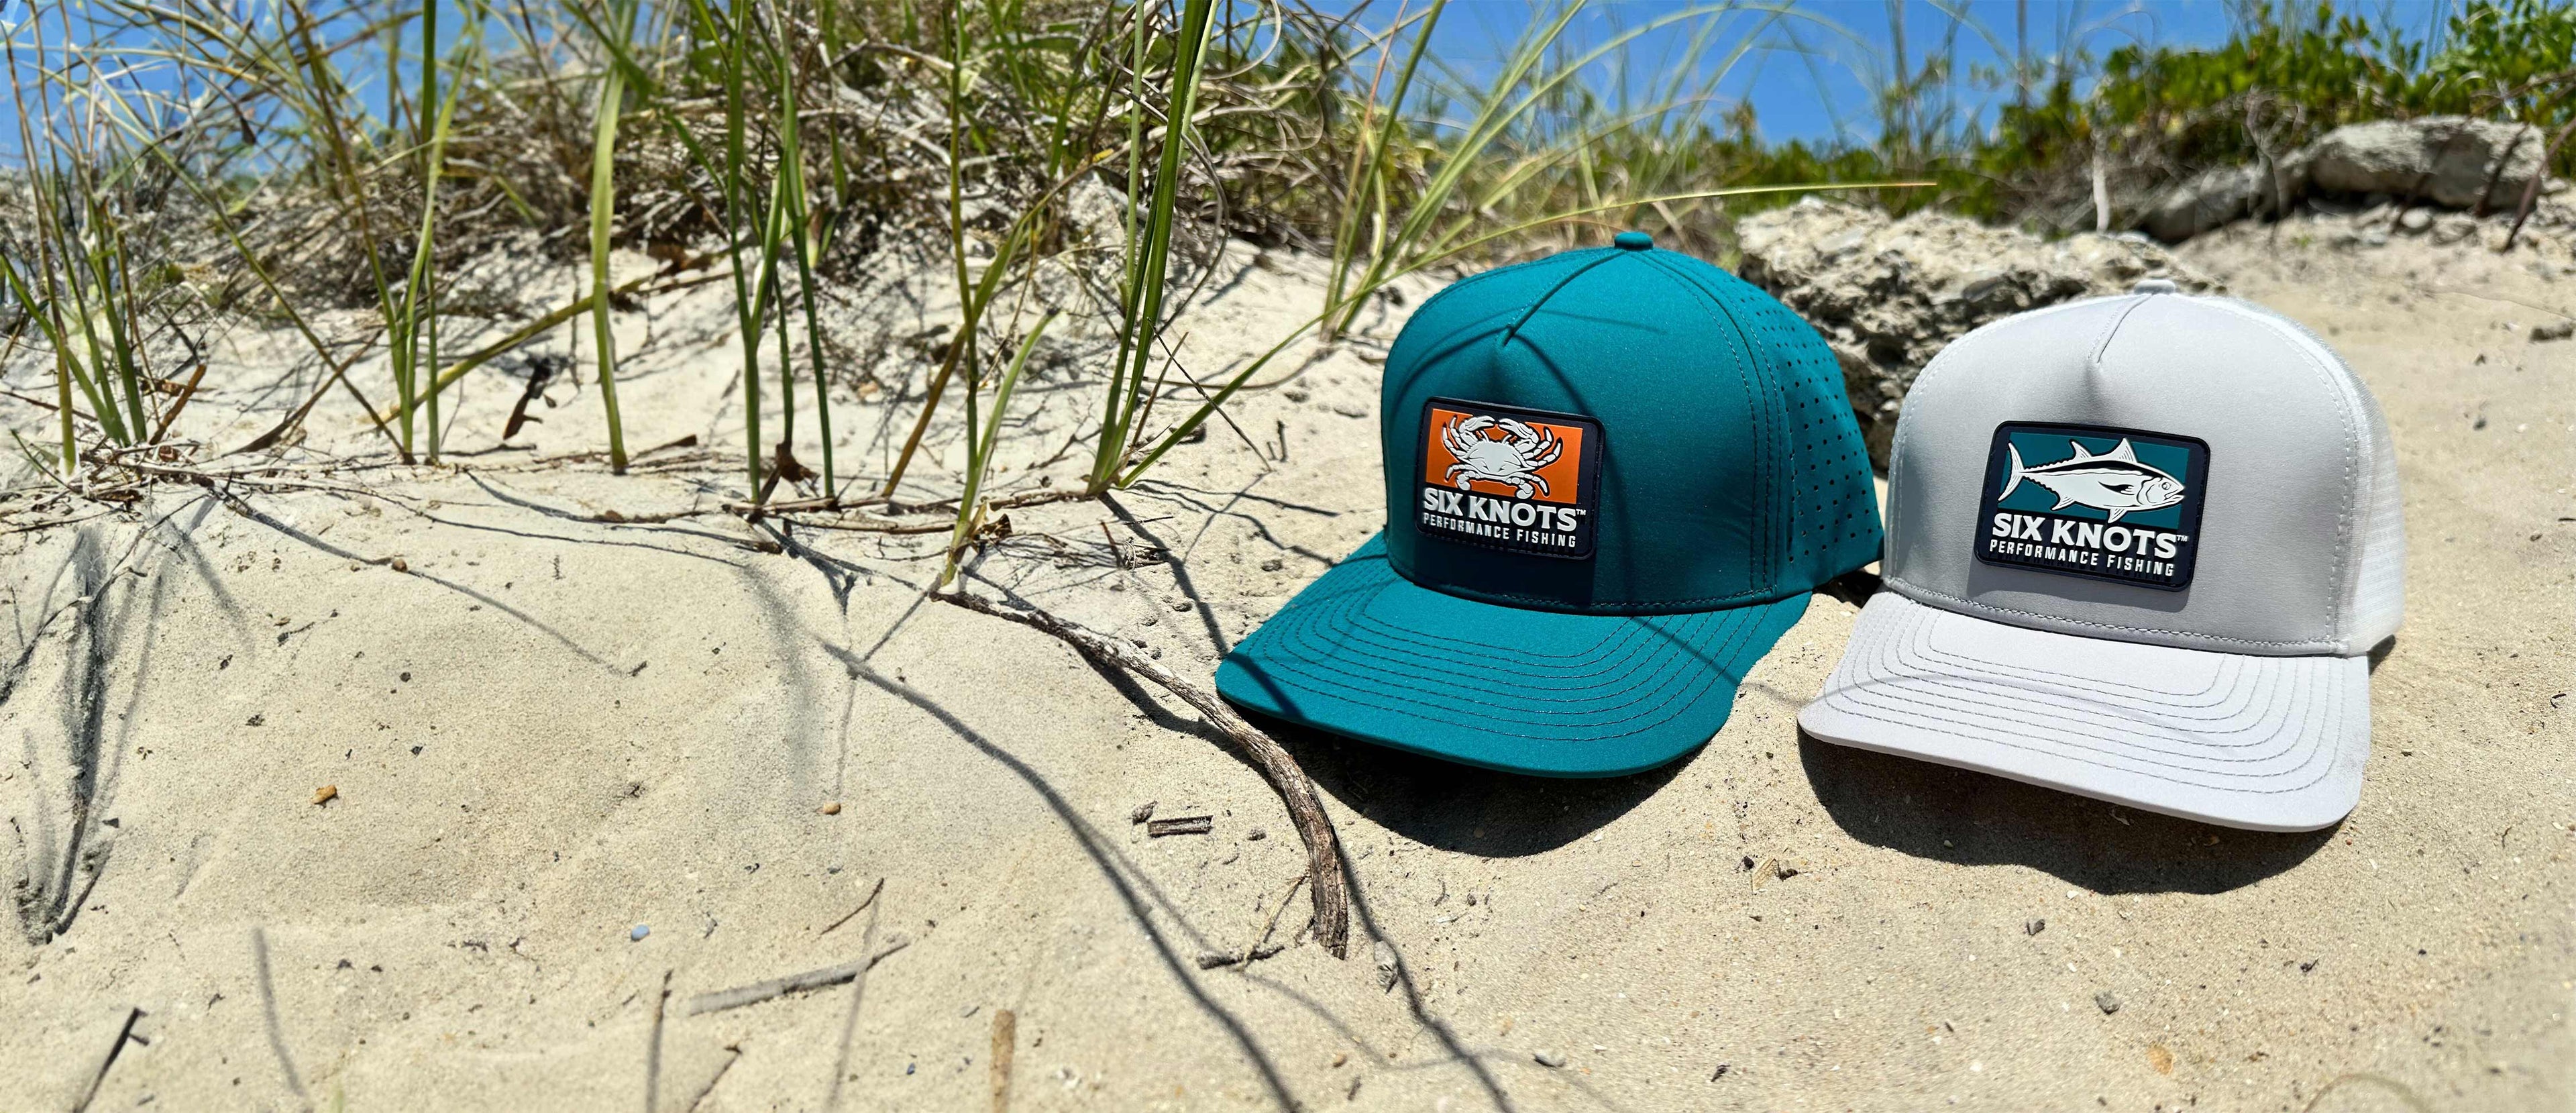 Six Knots water resistant hats sitting in the sand on a beach in North Carolina